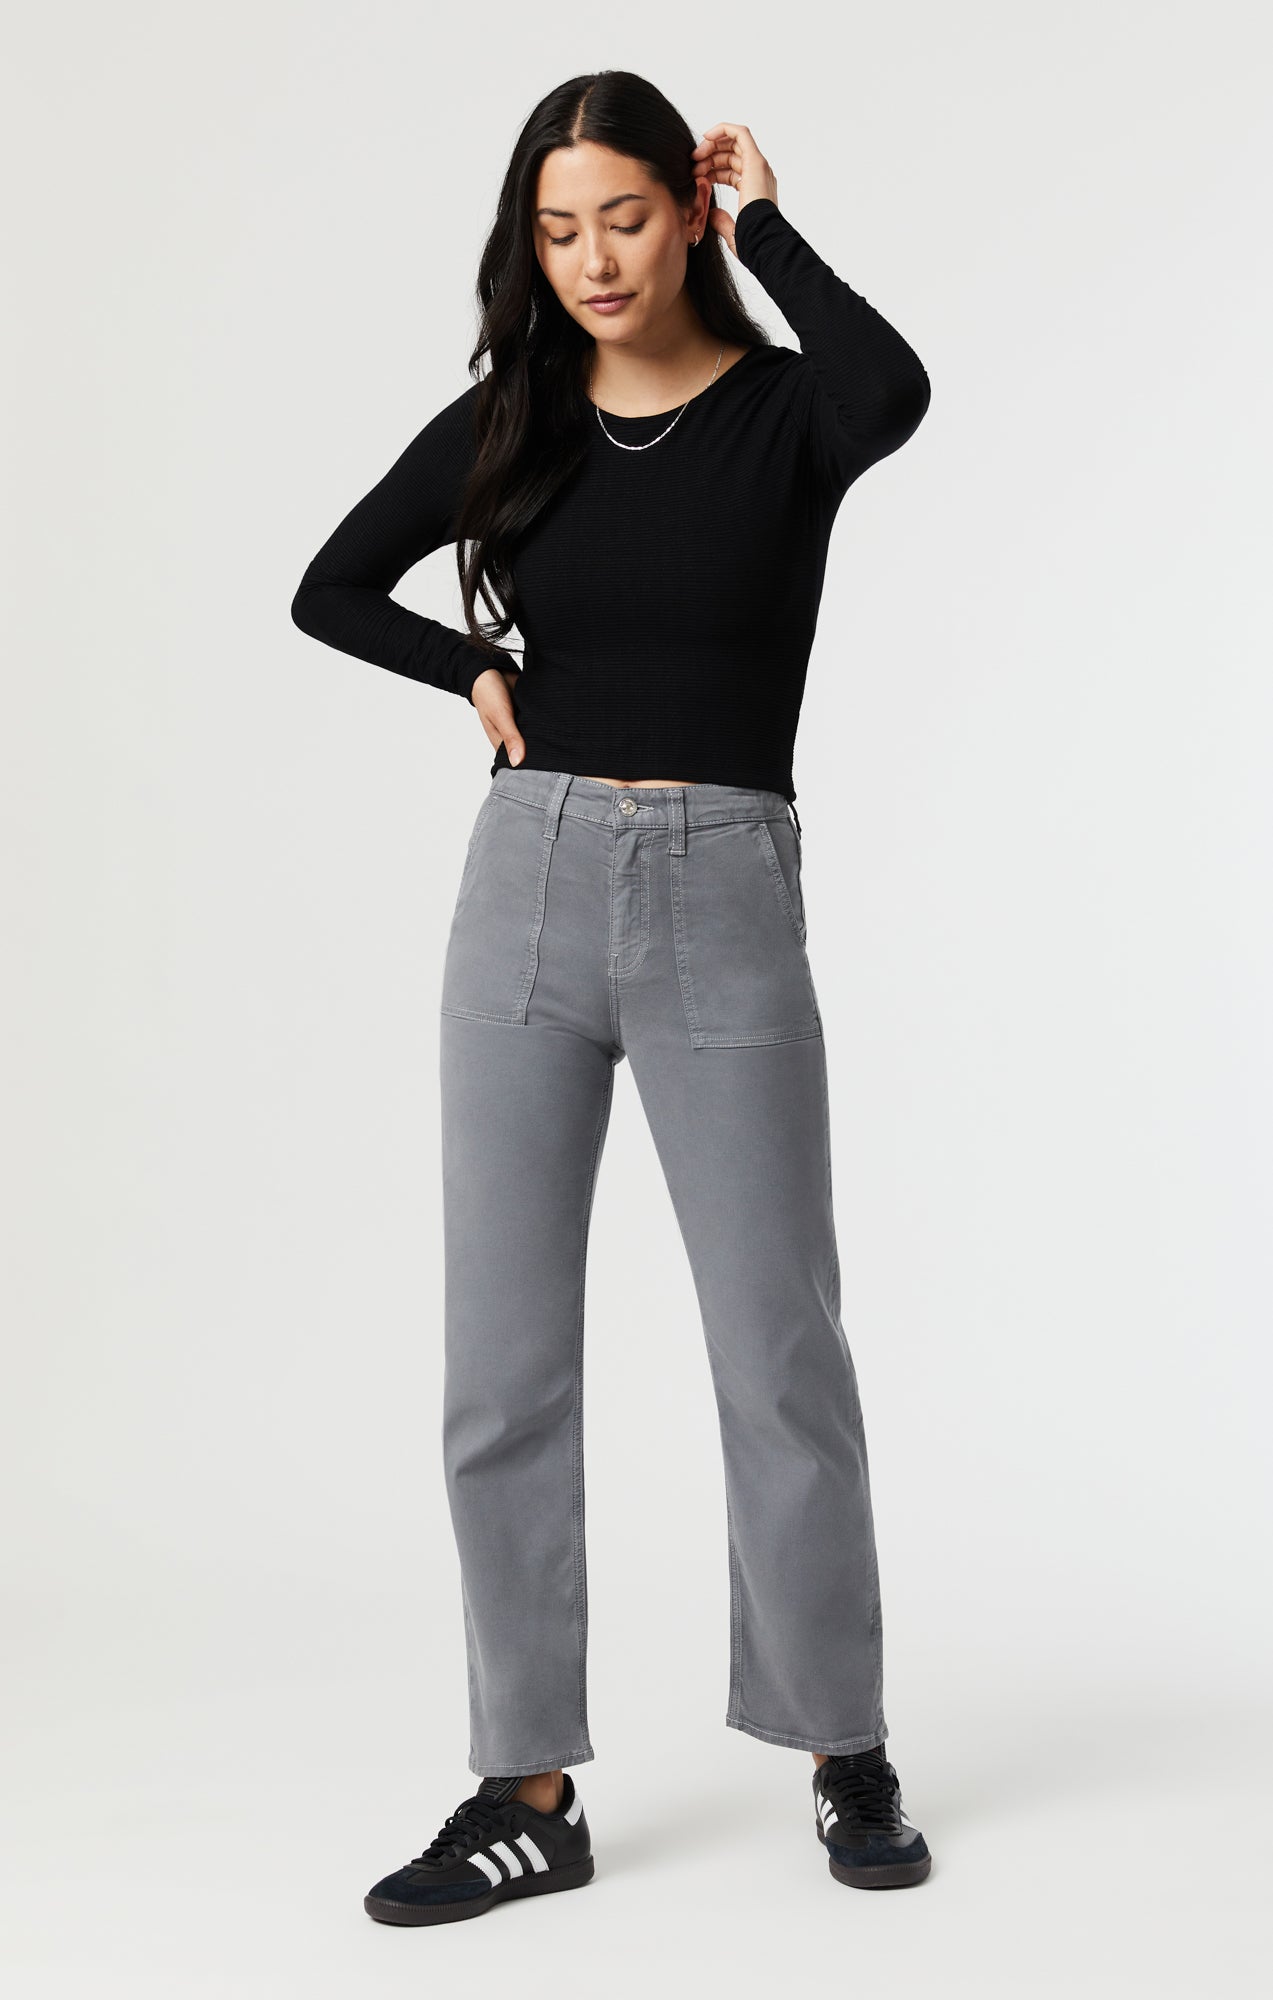 Buy She Stretch Pants Women's Skinny Ankle Trousers (L, MEHROON) at